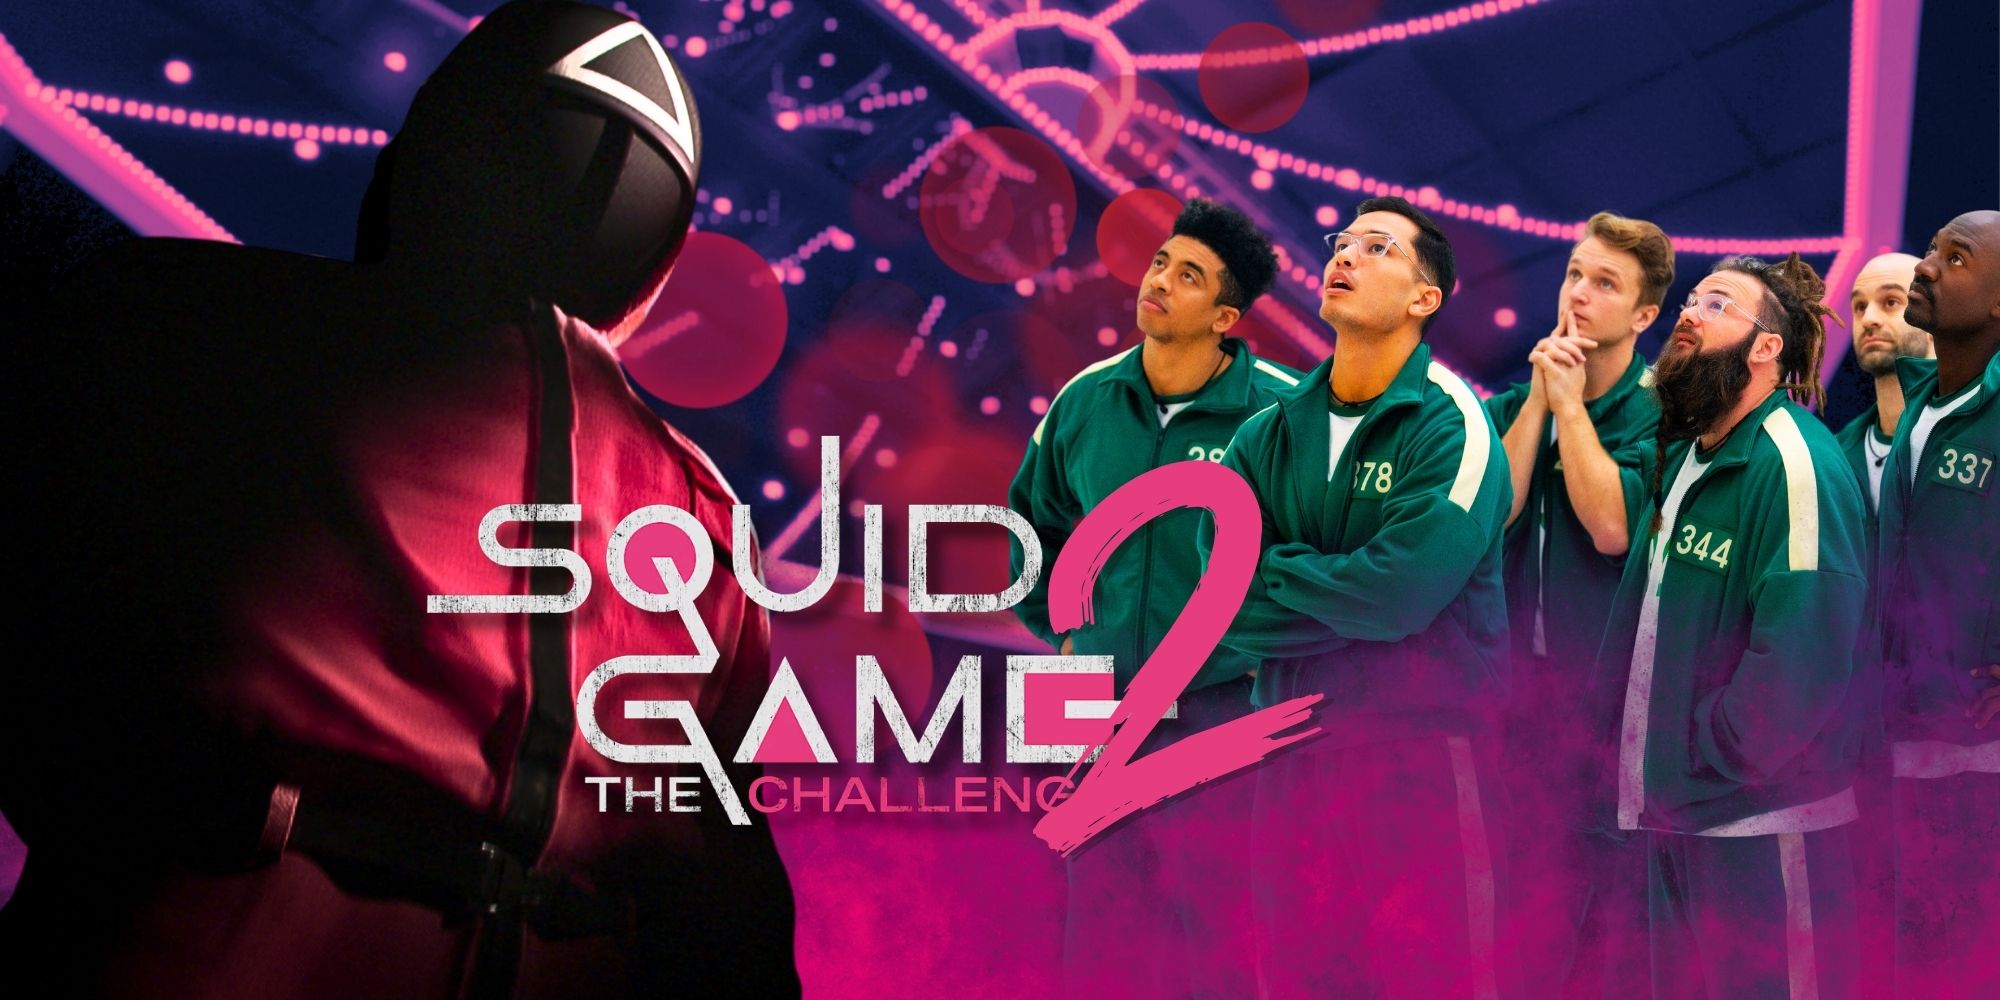 How Player 278, Ashley Tolbert, became the villain of Squid Game